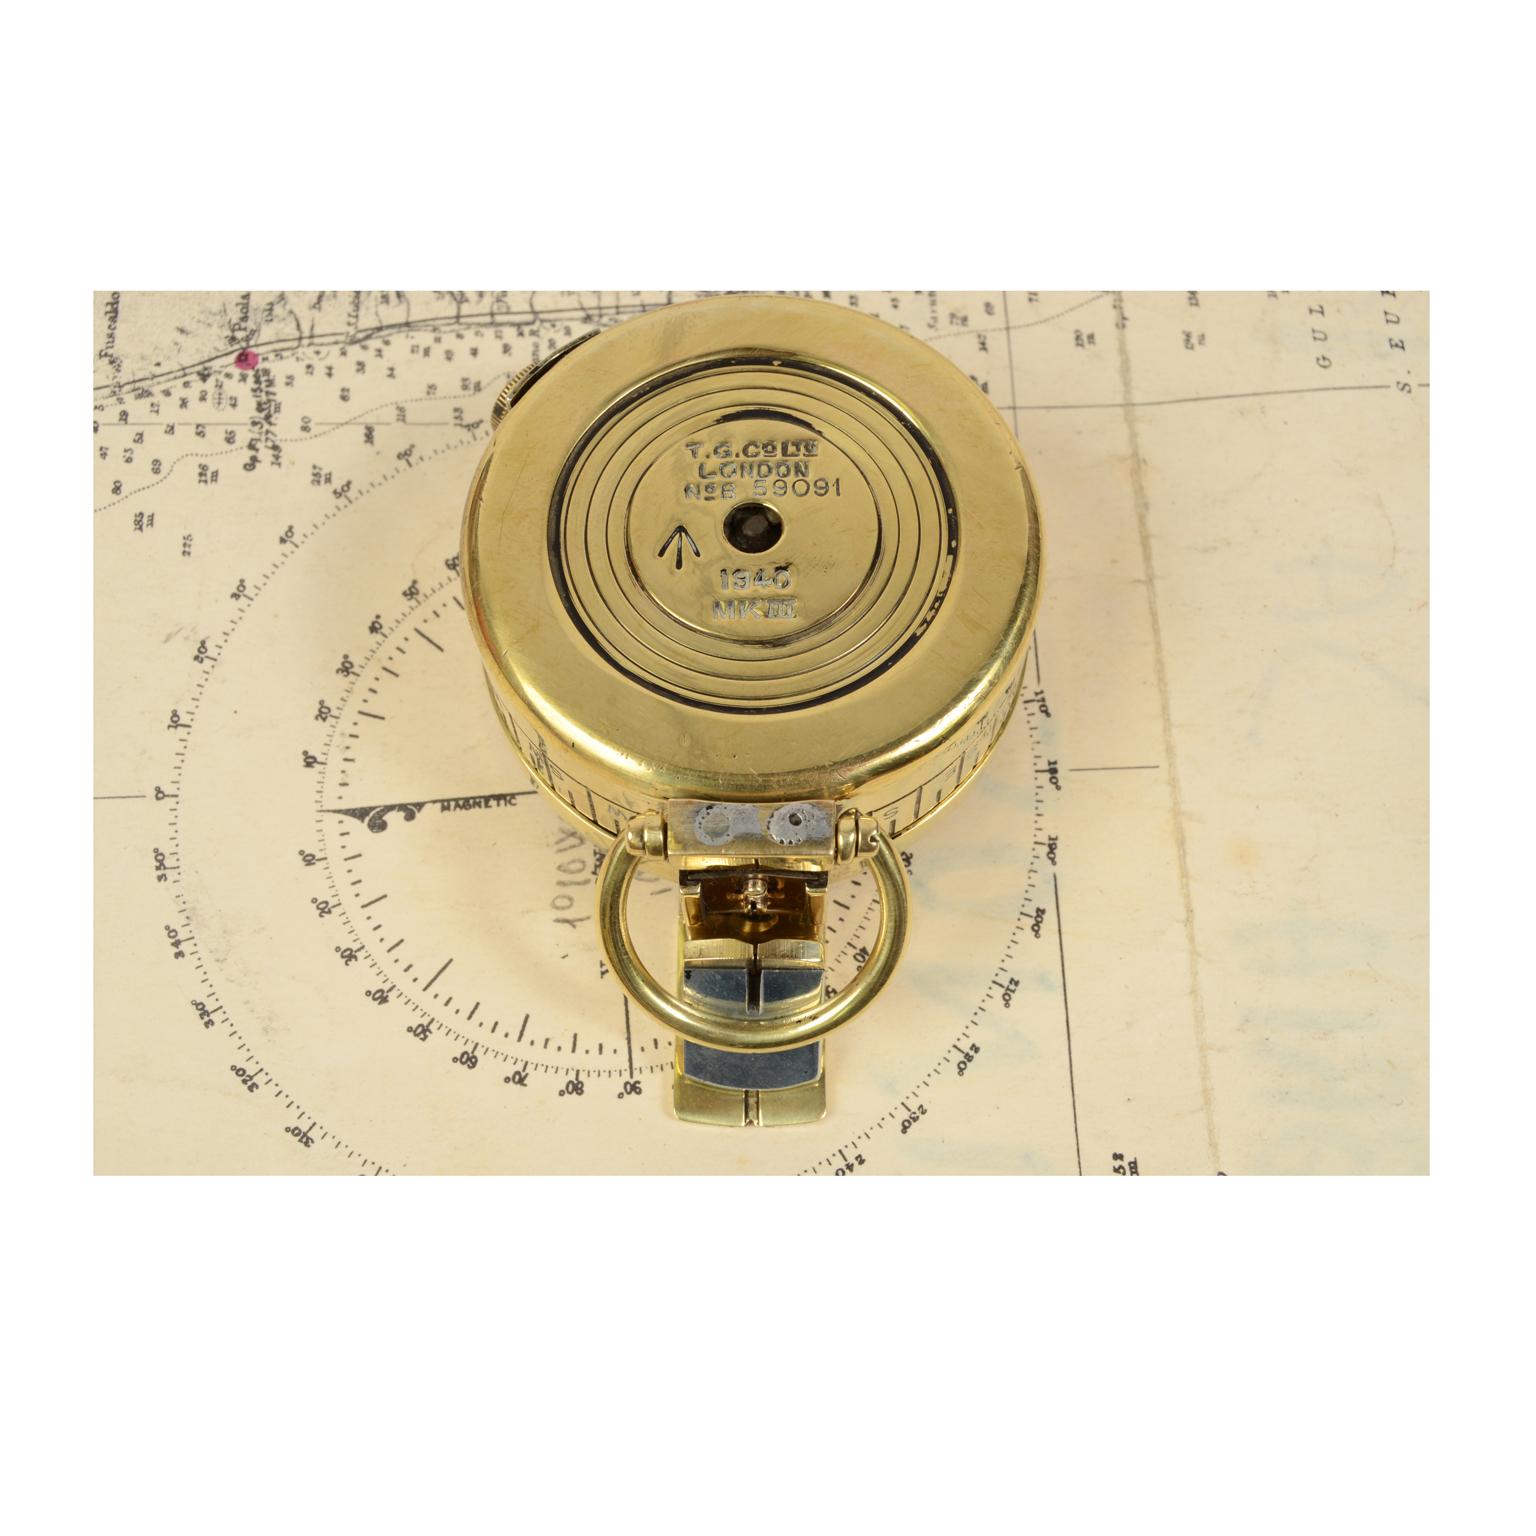 Prismatic Brass Compass UK 1940 for British Army Officers WWII 2